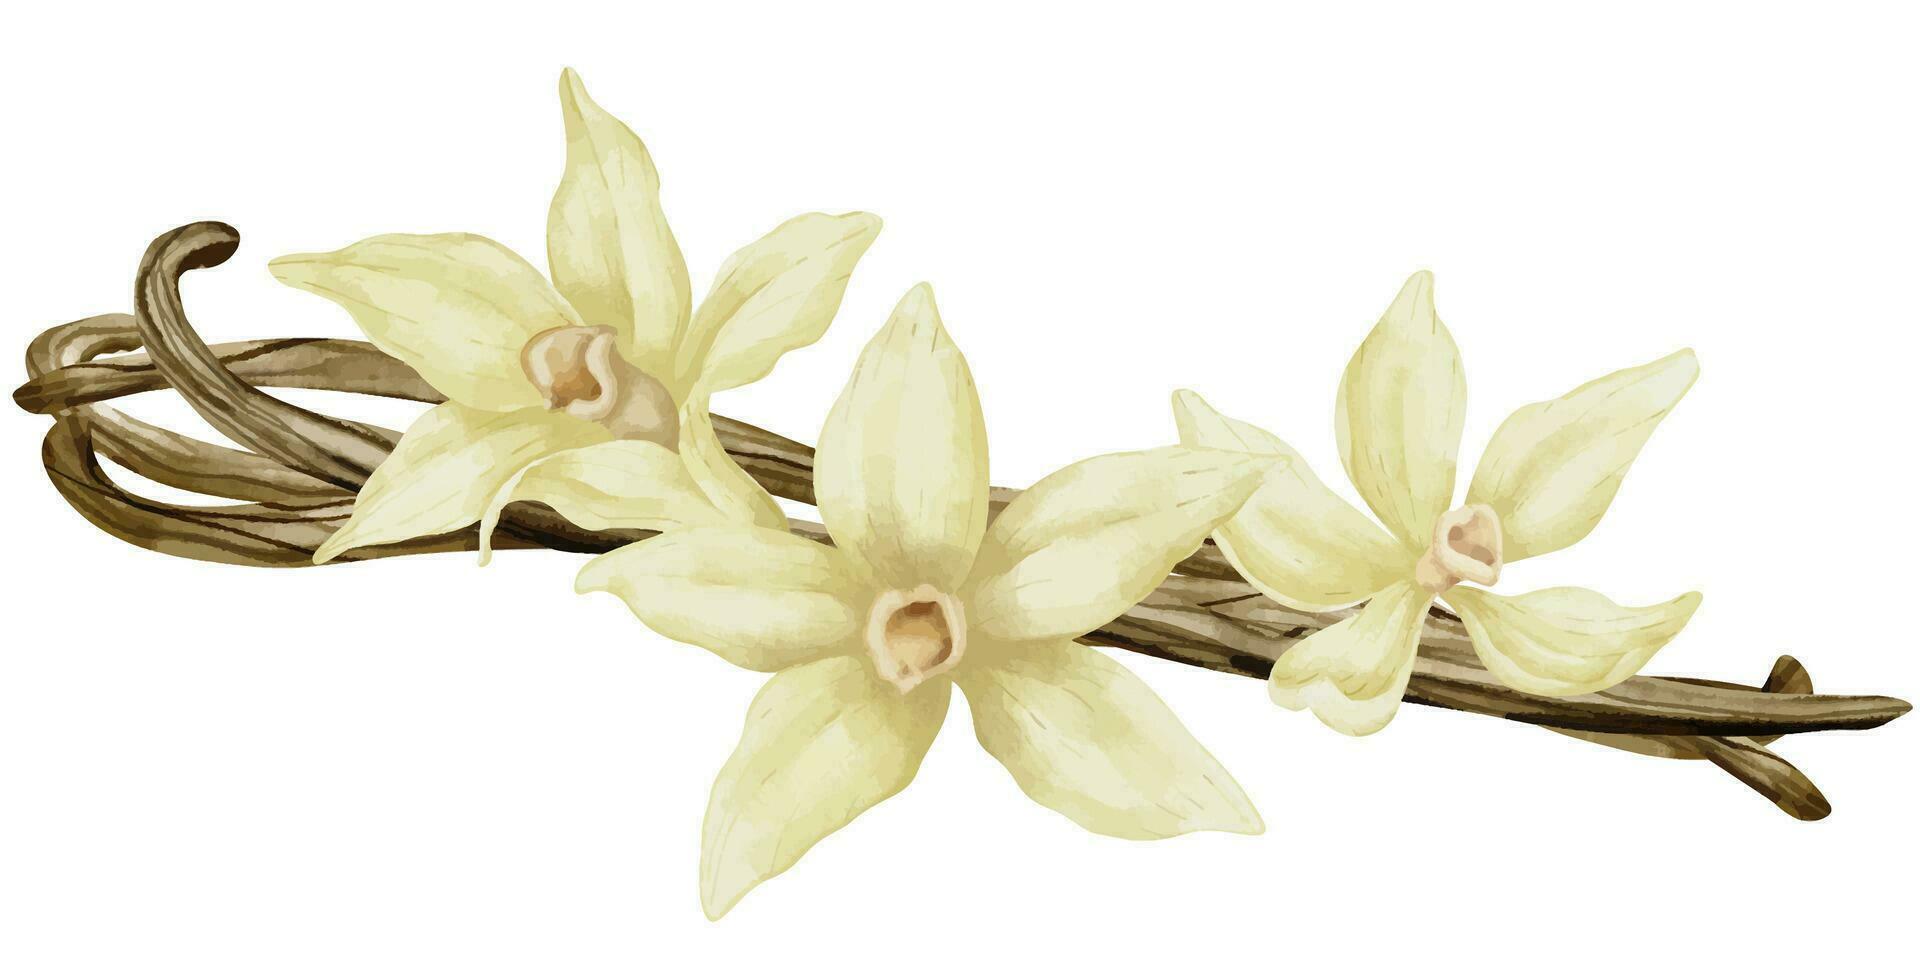 Vanilla Flowers with Sticks. Watercolor hand drawn illustration of yellow orchid Flower and pods on white isolated background. Drawing of spice for cooking or aroma oils. sketch of herbal ingredient vector